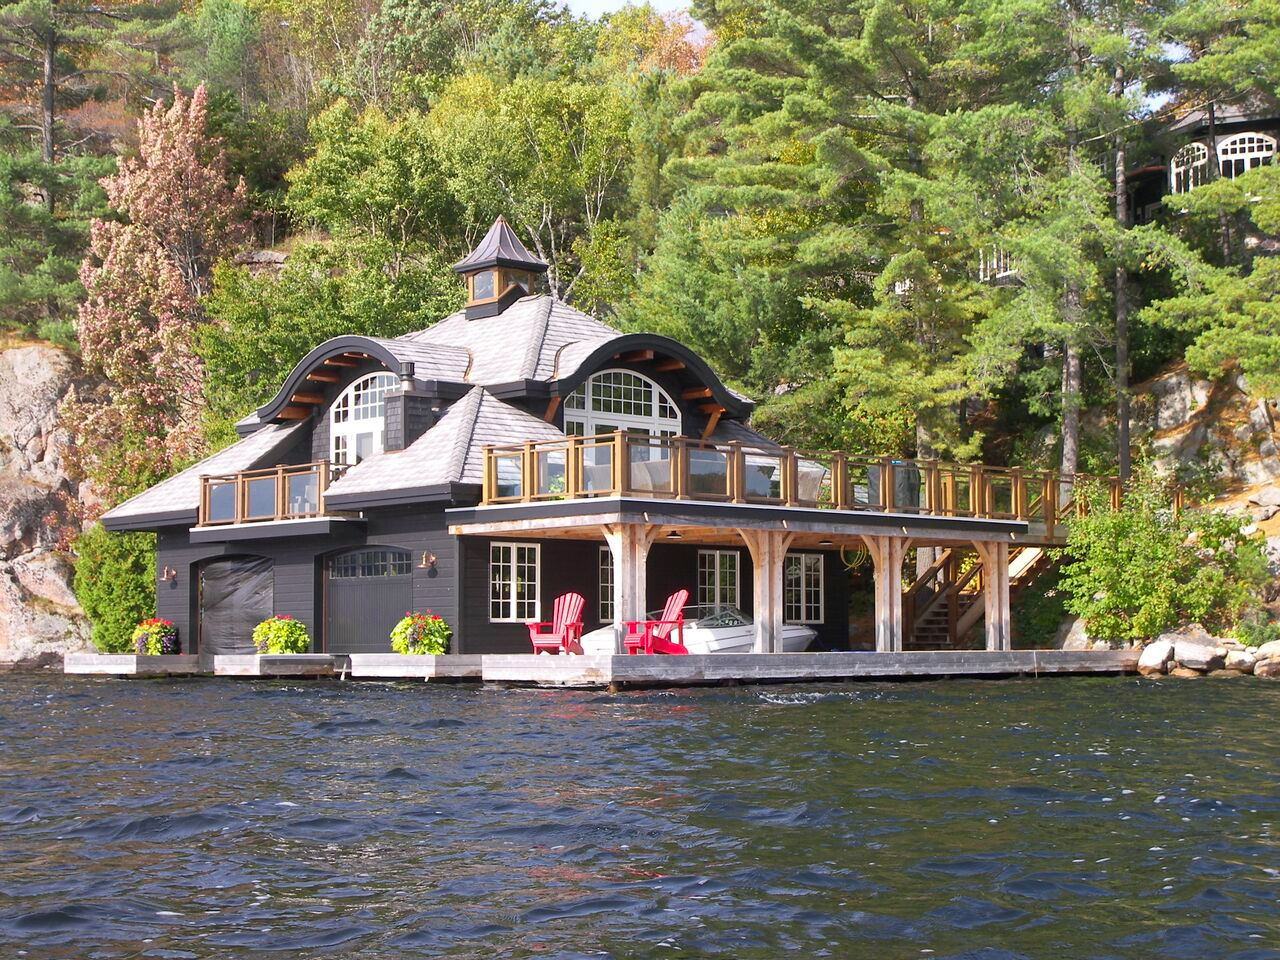 A boathouse sits on a lake in Ontario cottage country, down from a luxury home, just barely visible in a corner of the image.